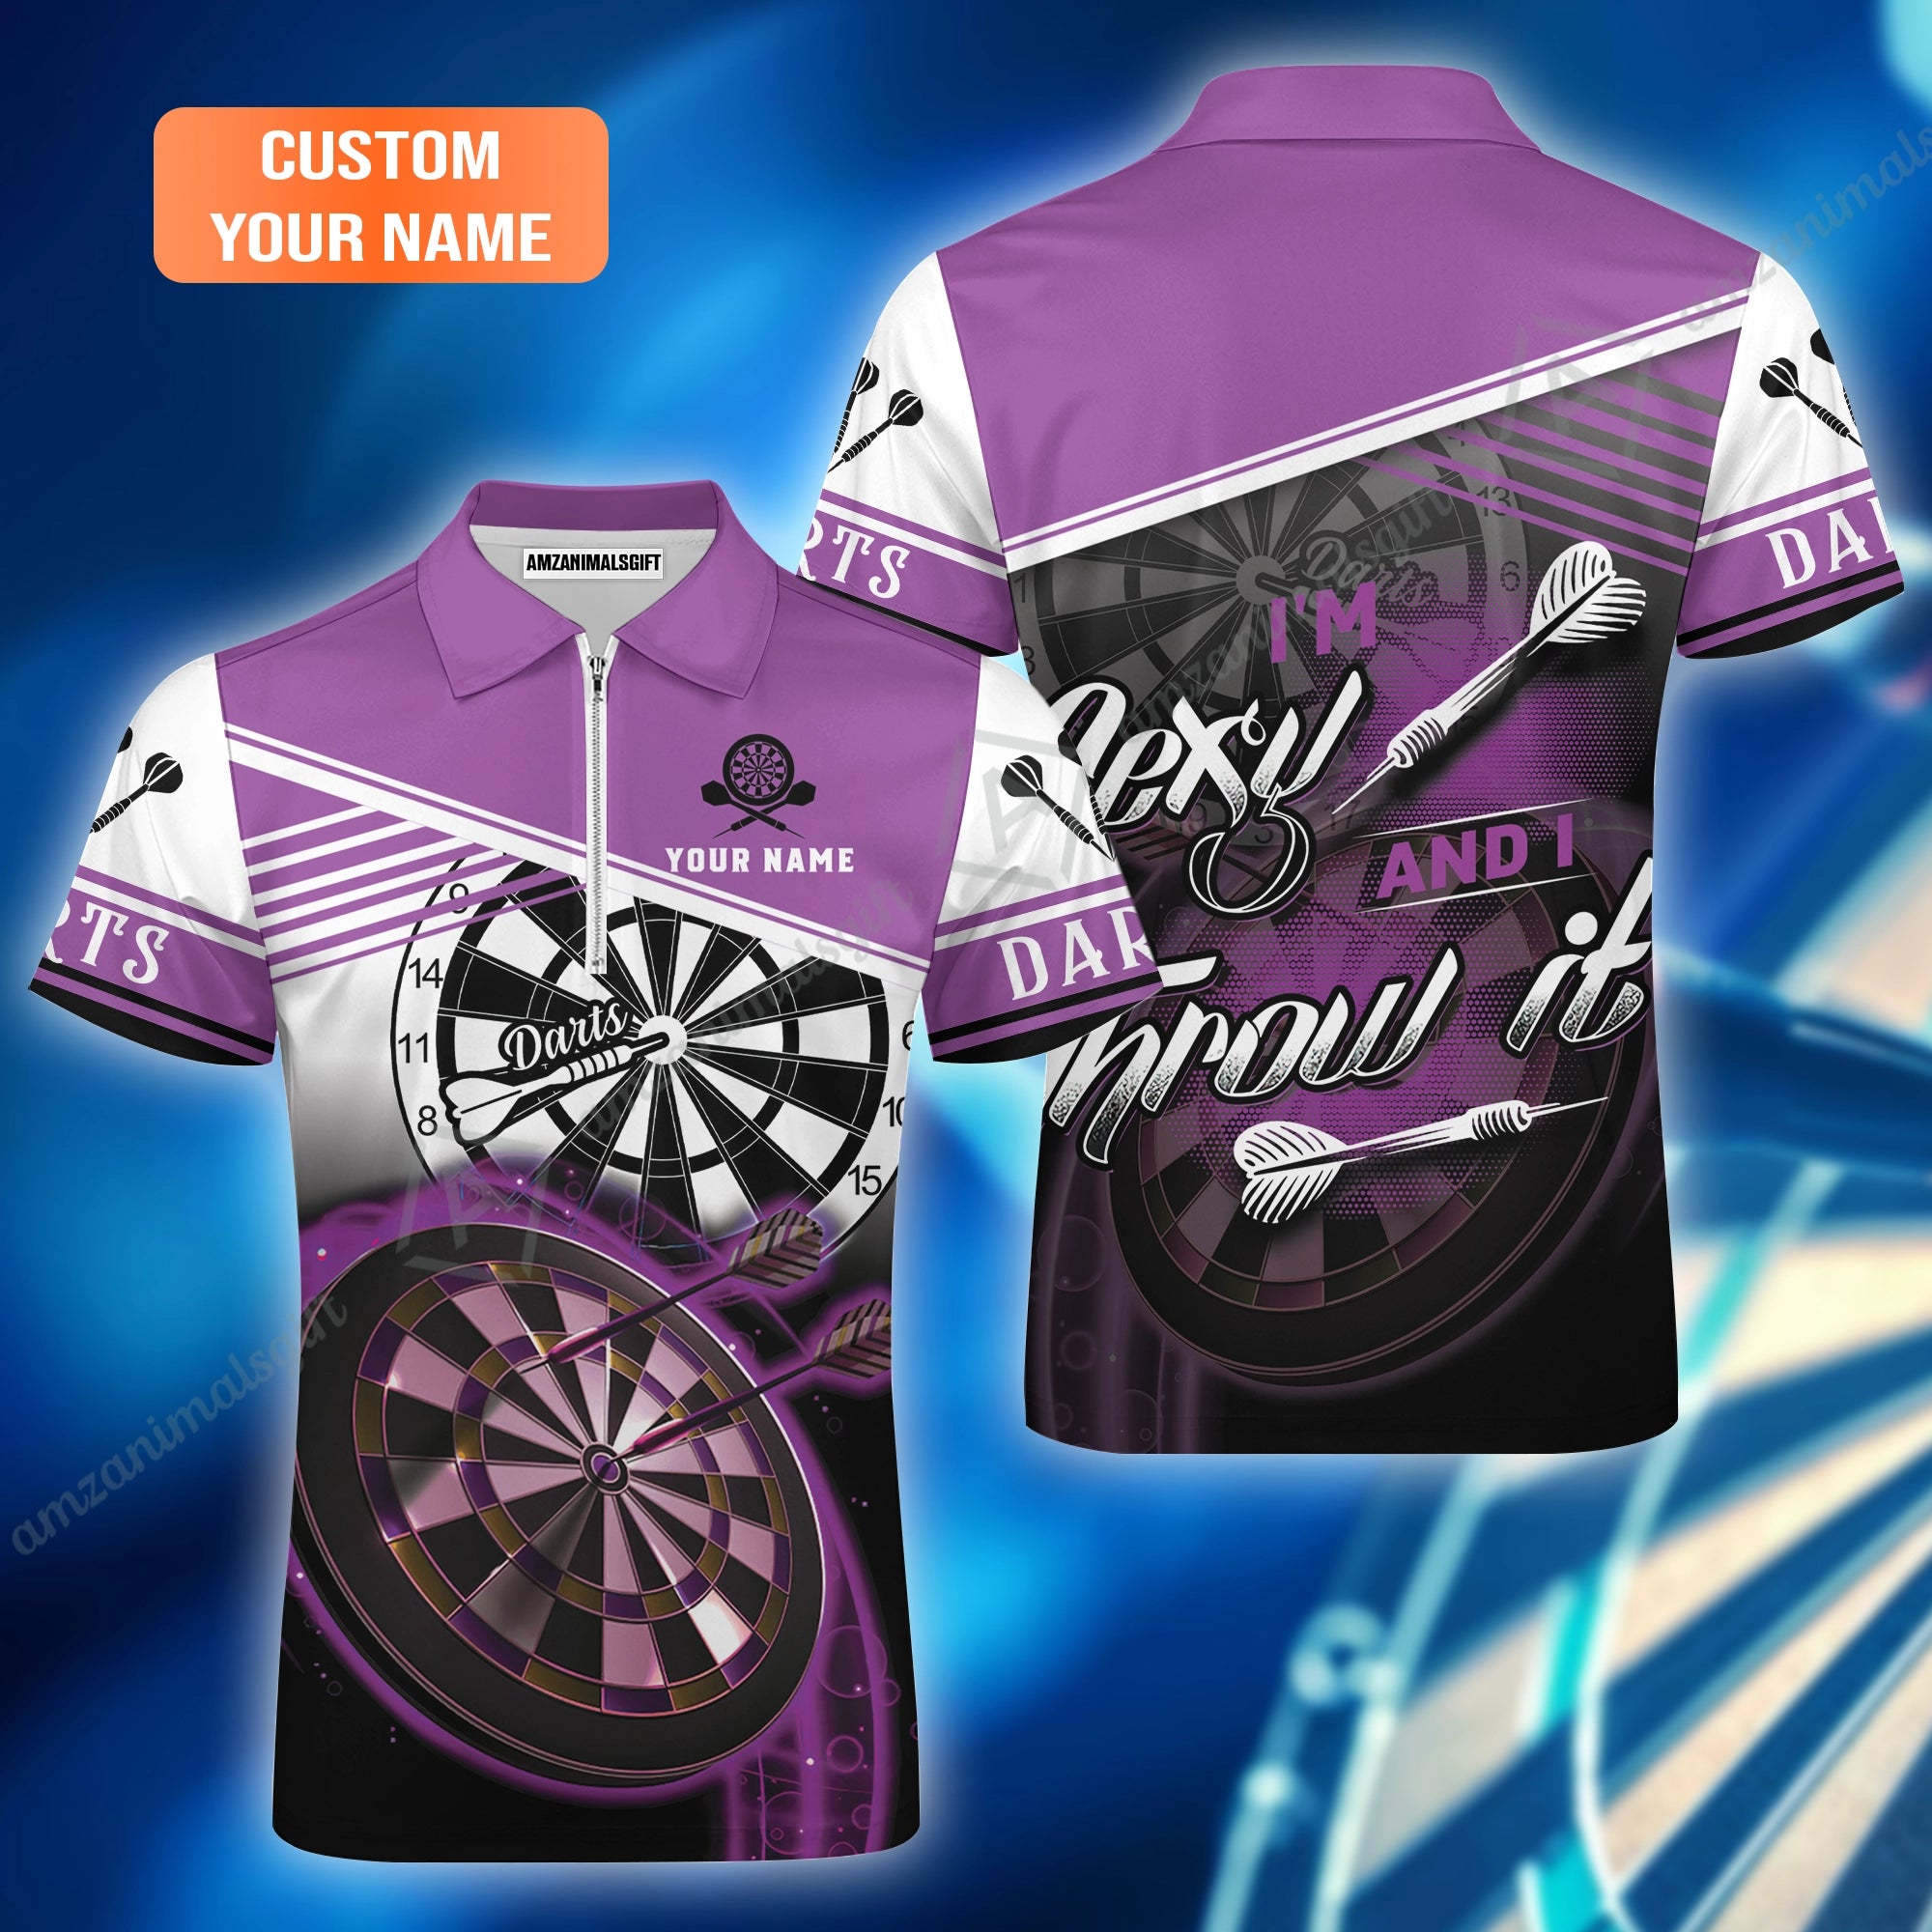 Personalized Darts Jersey, Darts Purple Color Customized Quarter-Zip Polo Shirt I'm Sexy And I Throw It, Outfits For Darts Players, Darts Team